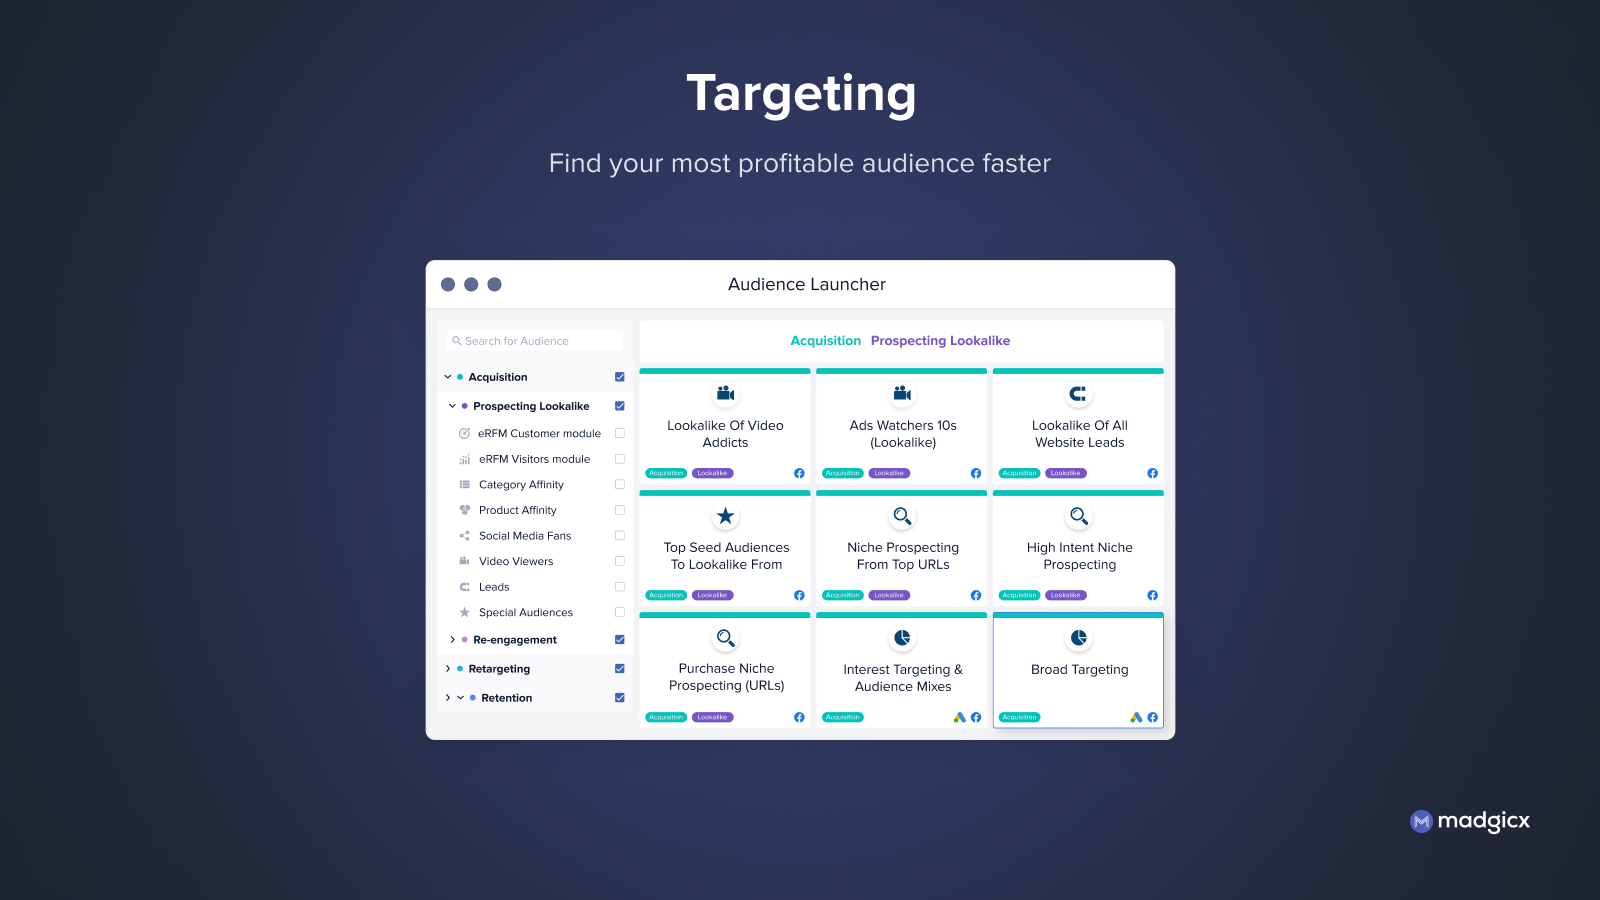 Choose from 100+ audiences and target all the audiences you should test